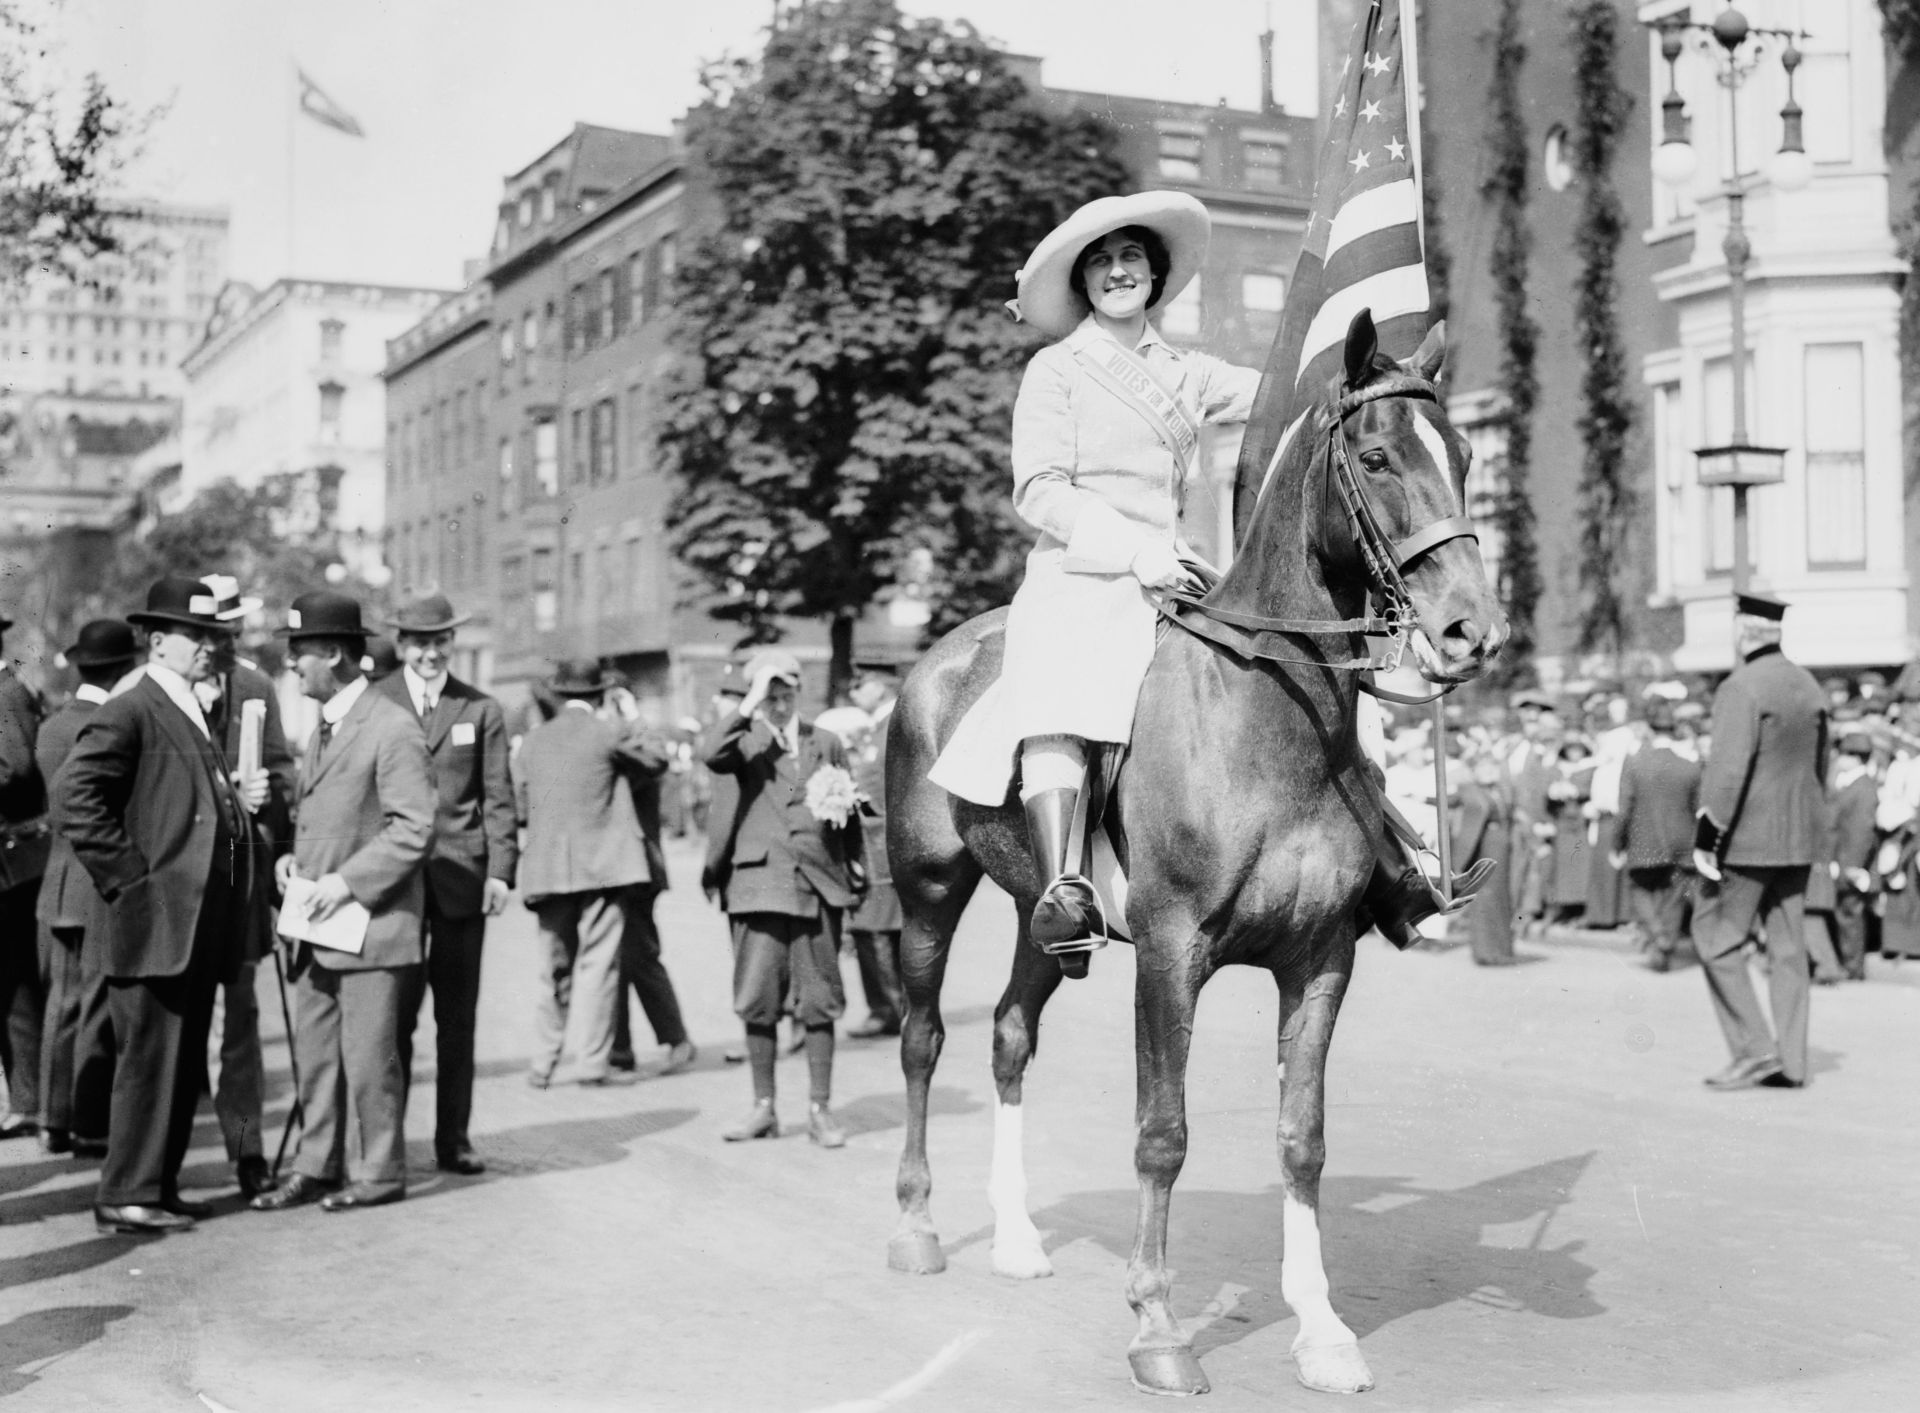 Inez Milholland on her white steed led the parade down Pennsylvania Avenue. Library of Congress